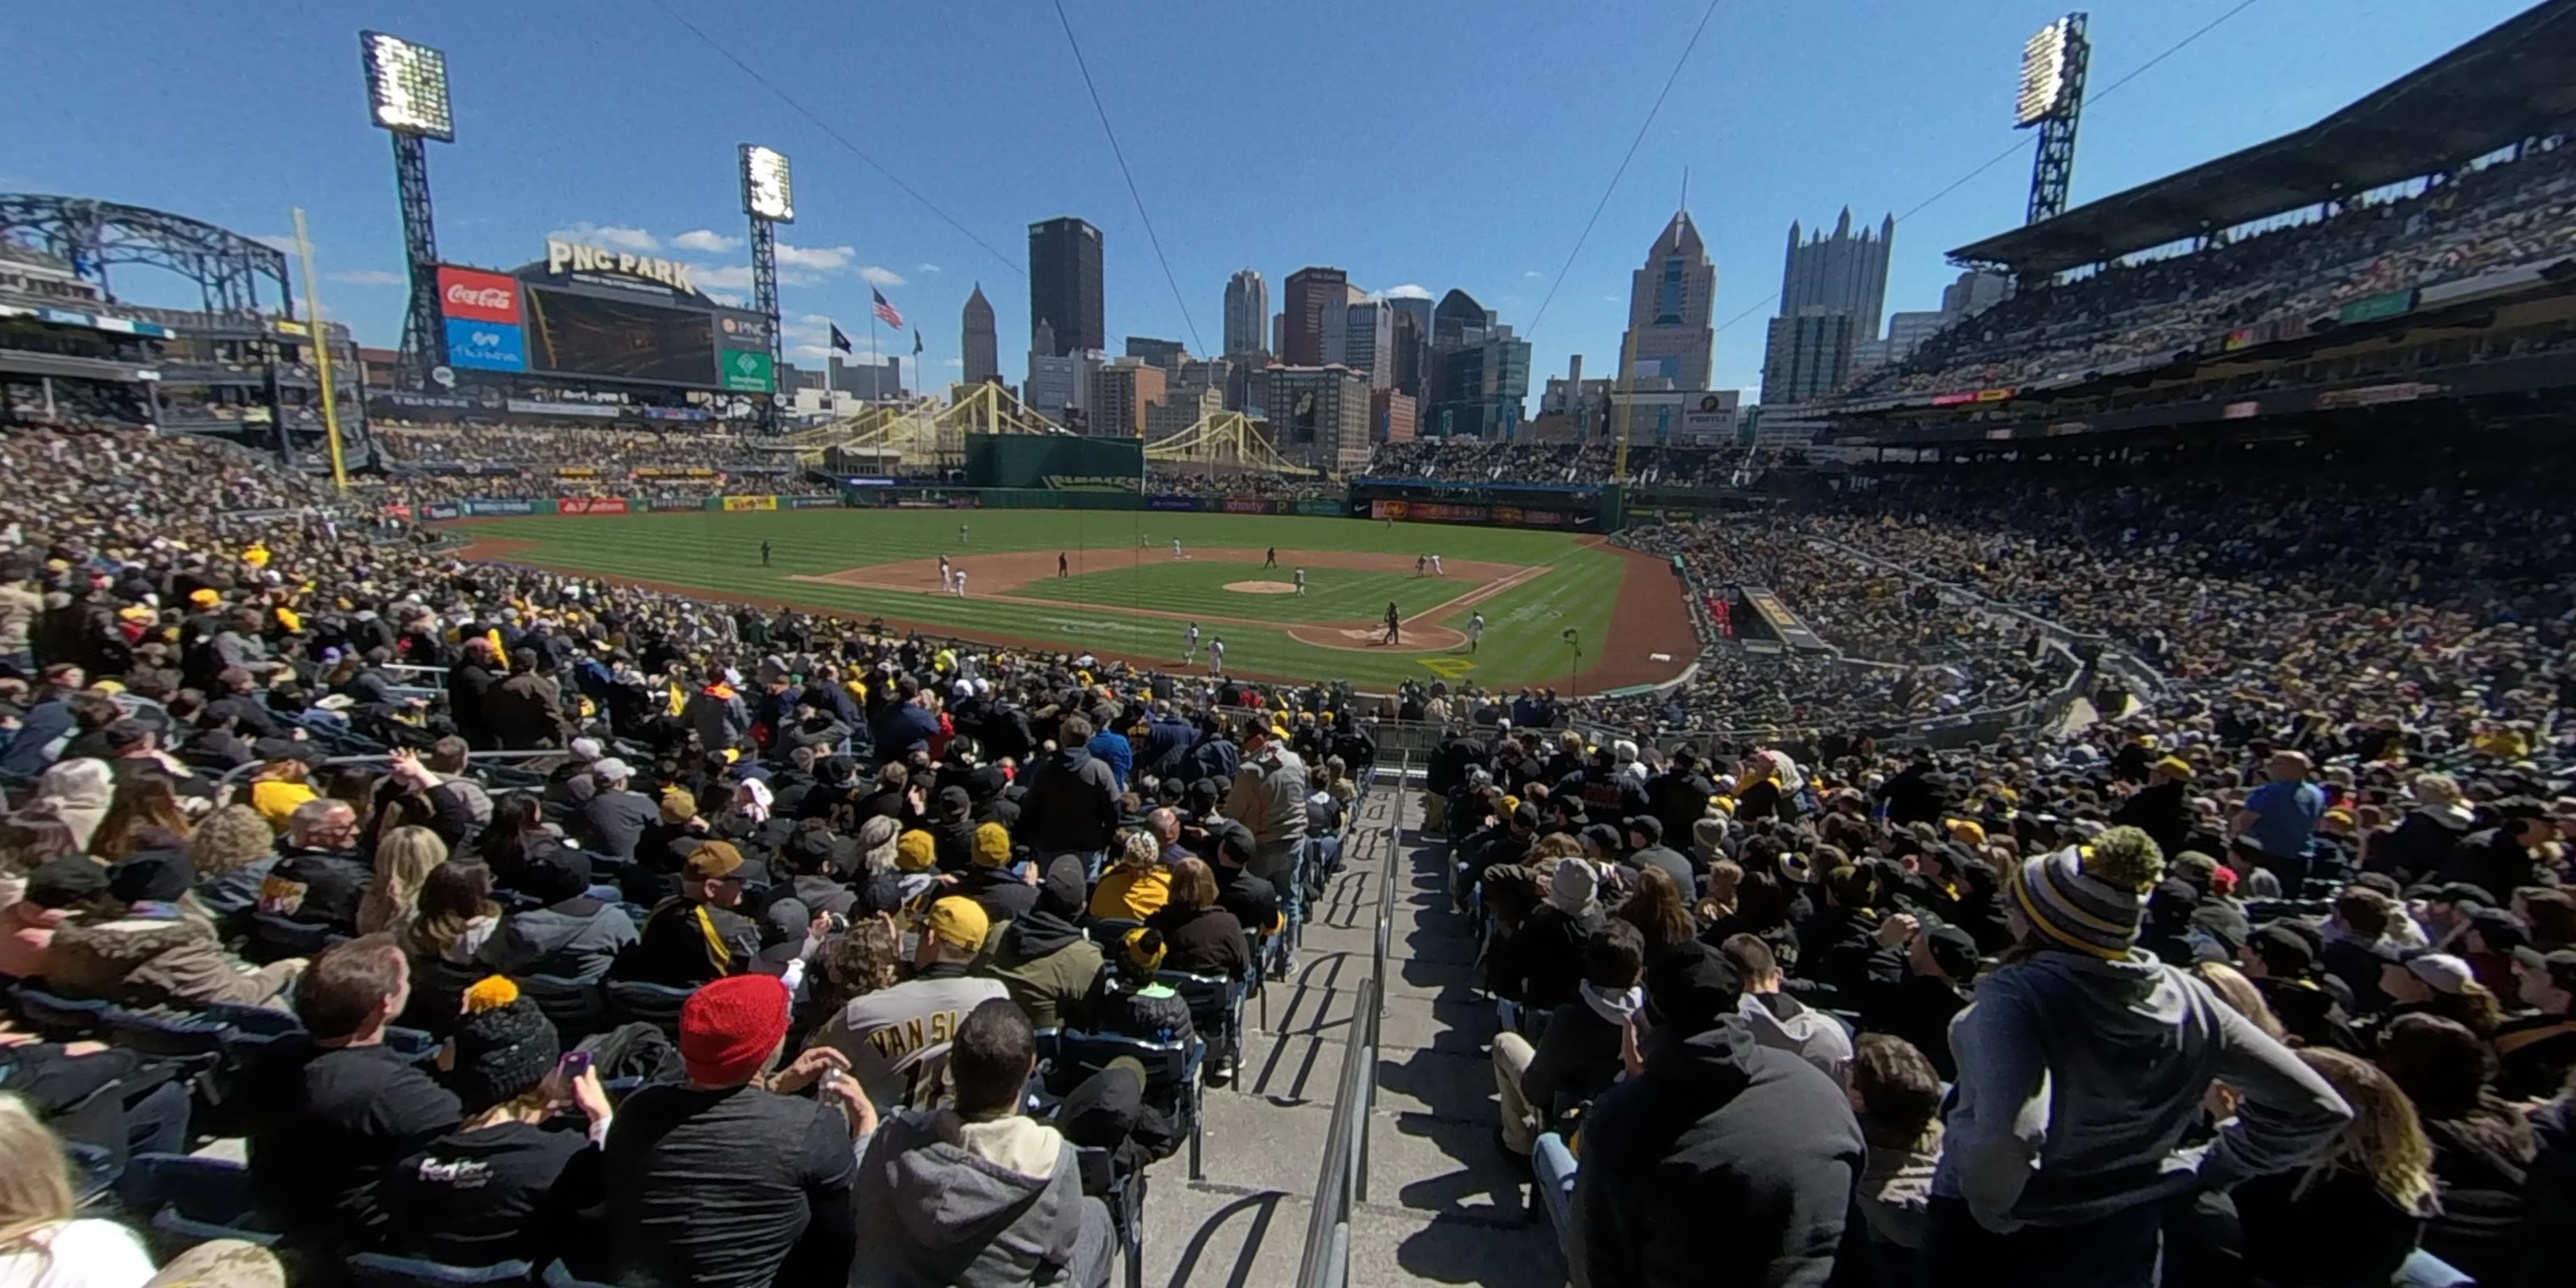 section 117 panoramic seat view  - pnc park